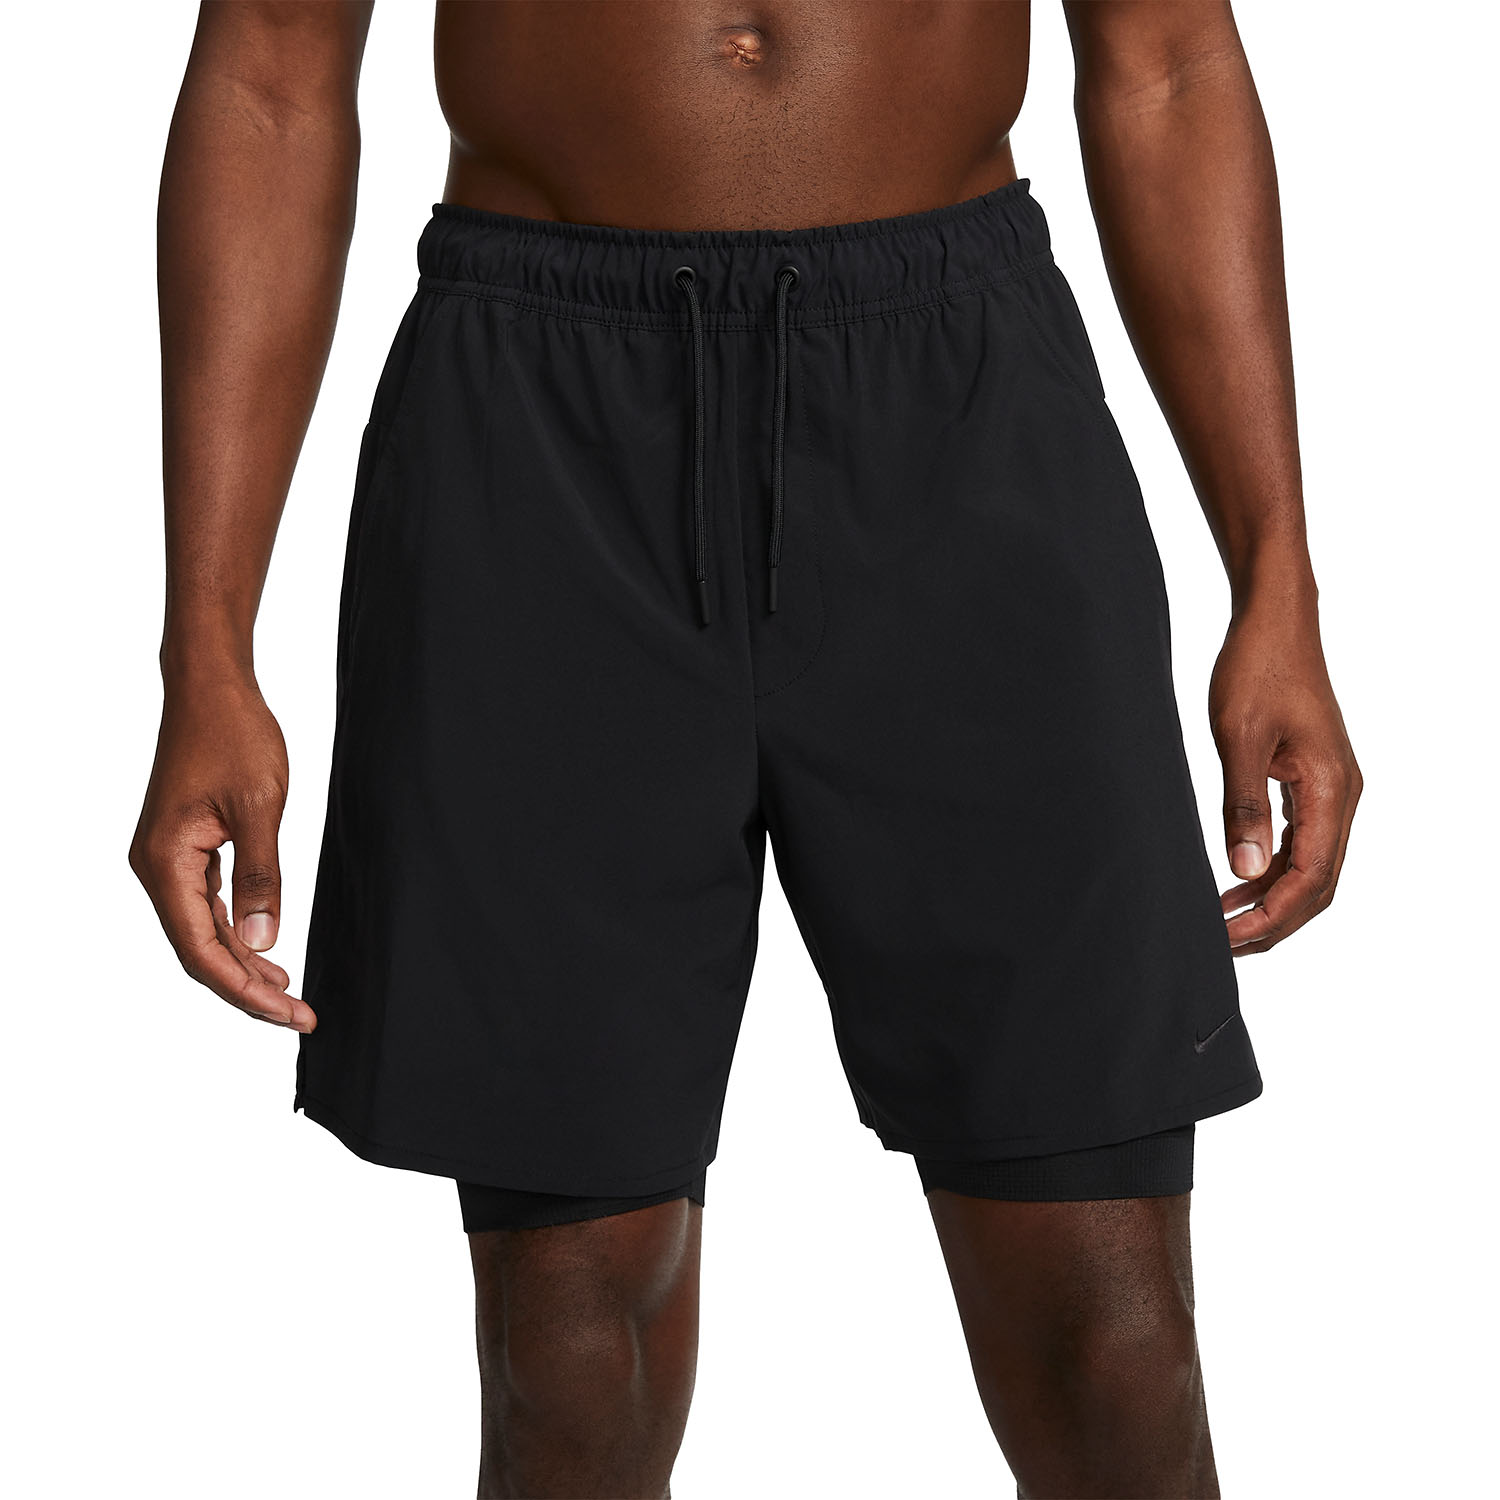 Nike Dri-FIT Unlined Fitness 2 in 1 7in Shorts - Black